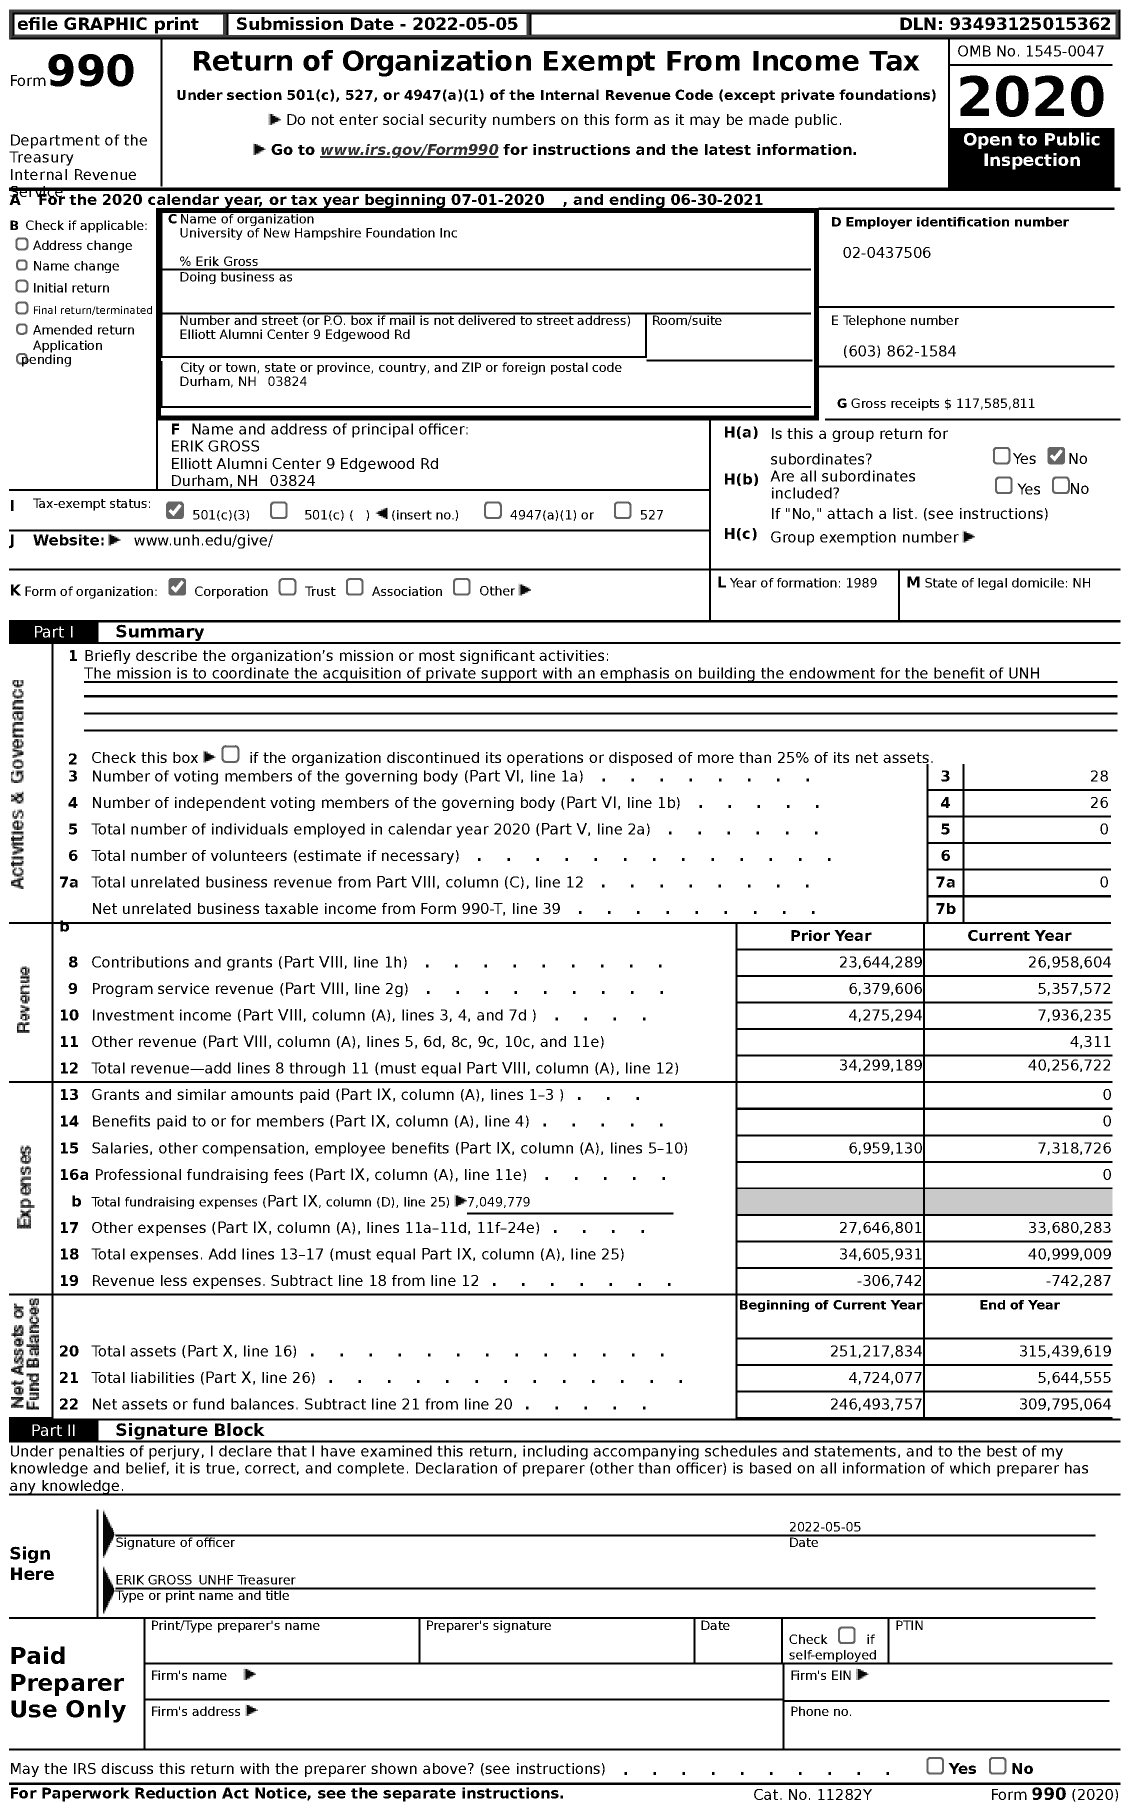 Image of first page of 2020 Form 990 for University of New Hampshire (UNH)